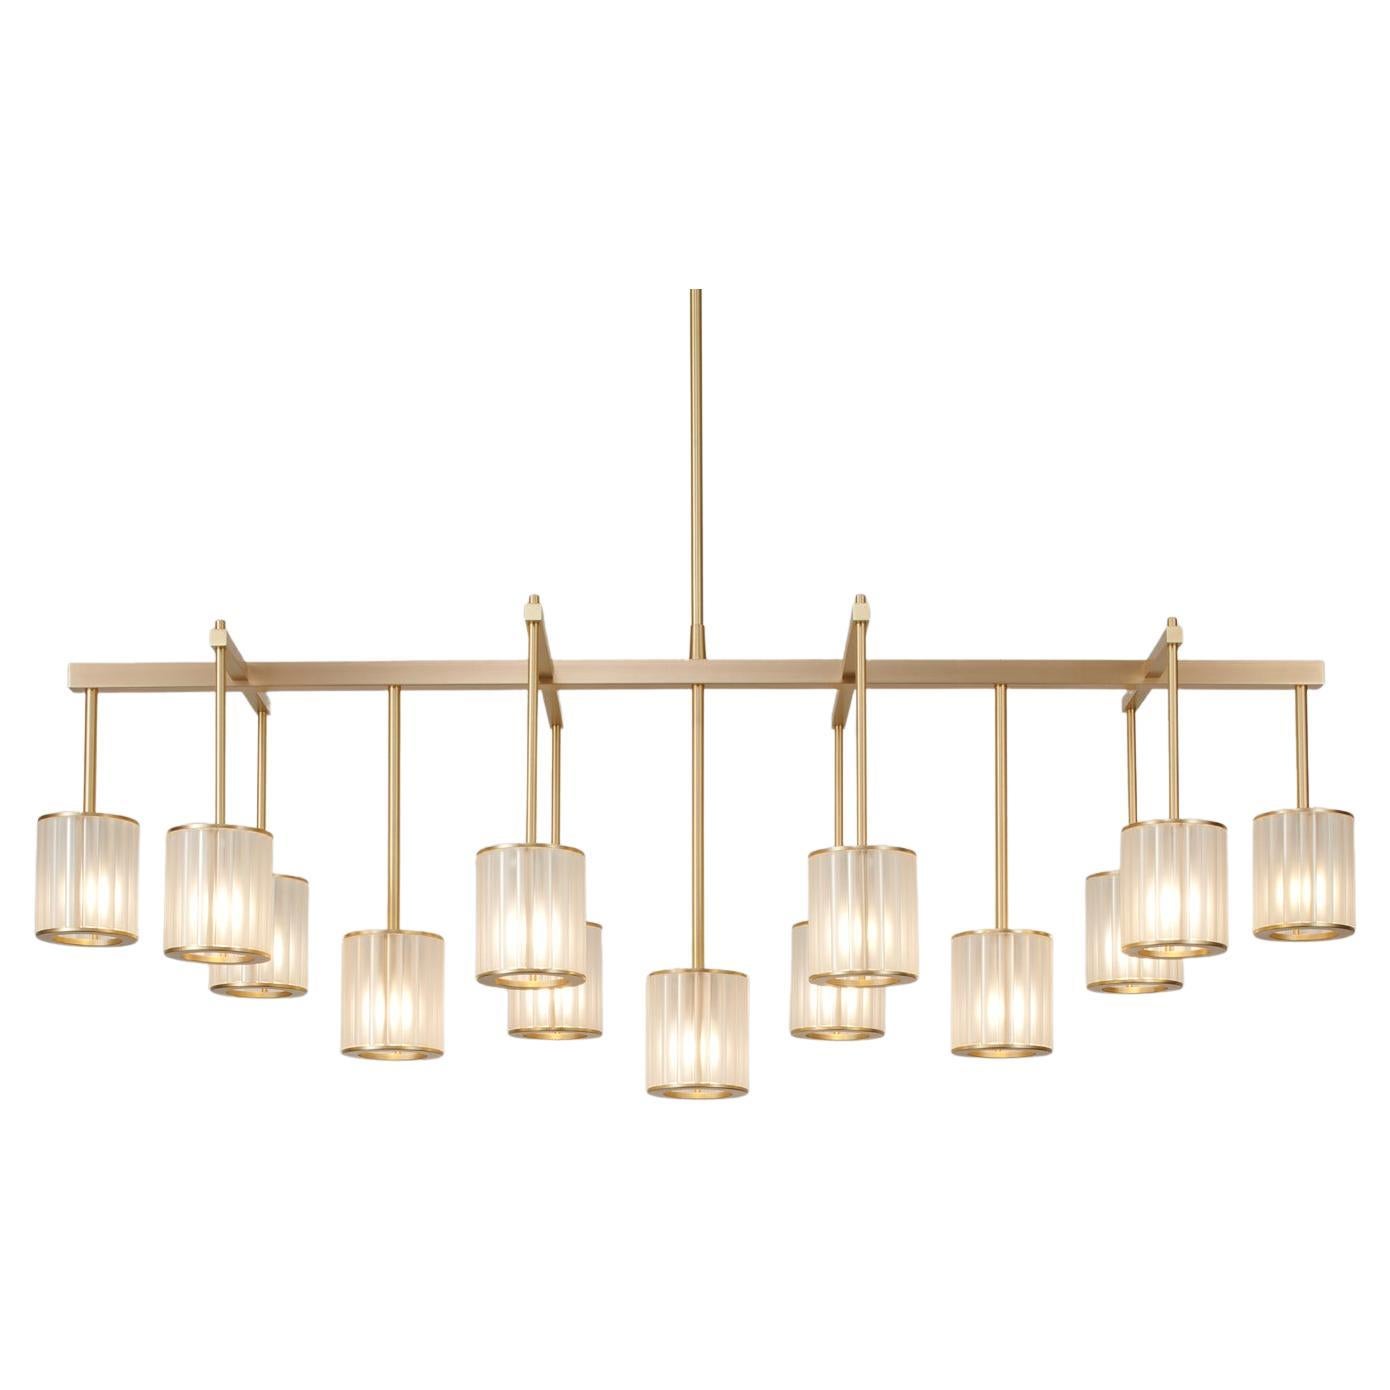 Flute Beam Chandelier with 13 Arms in Brushed Brass and Frosted Glass Diffusers For Sale